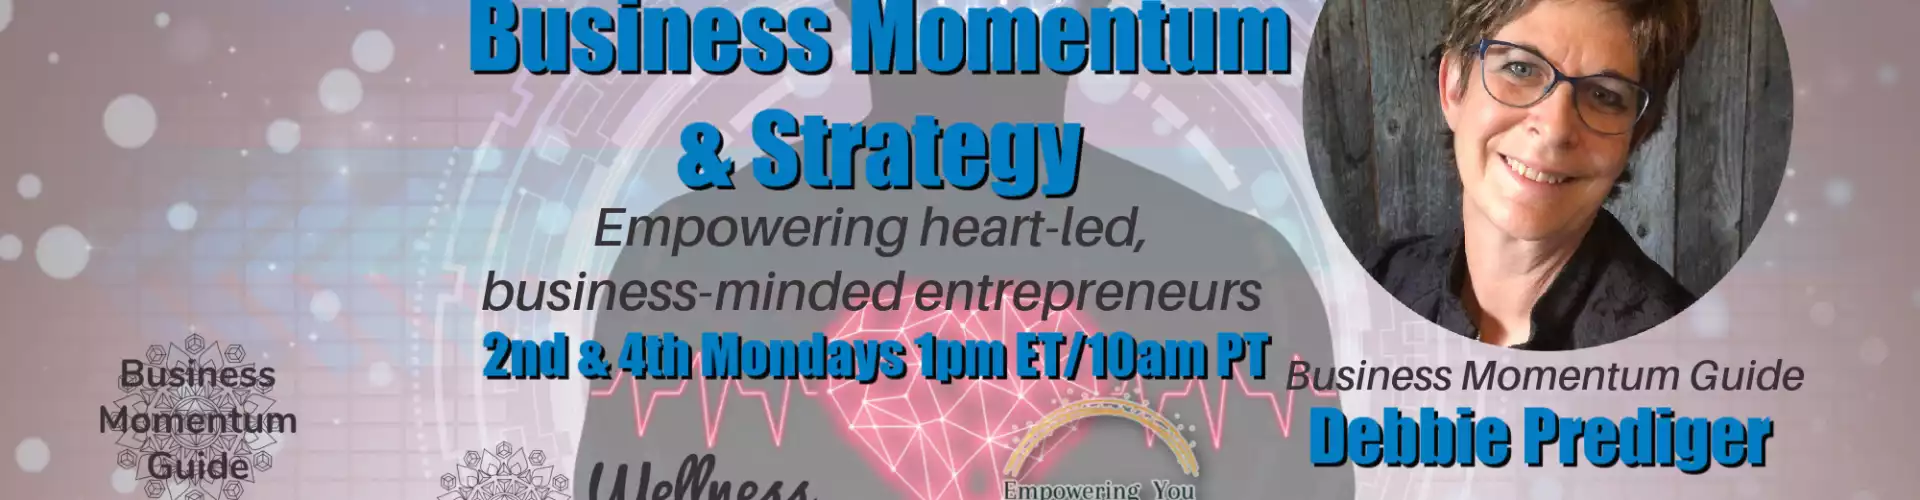 Business Momentum & Strategy with Guide Debbie Prediger